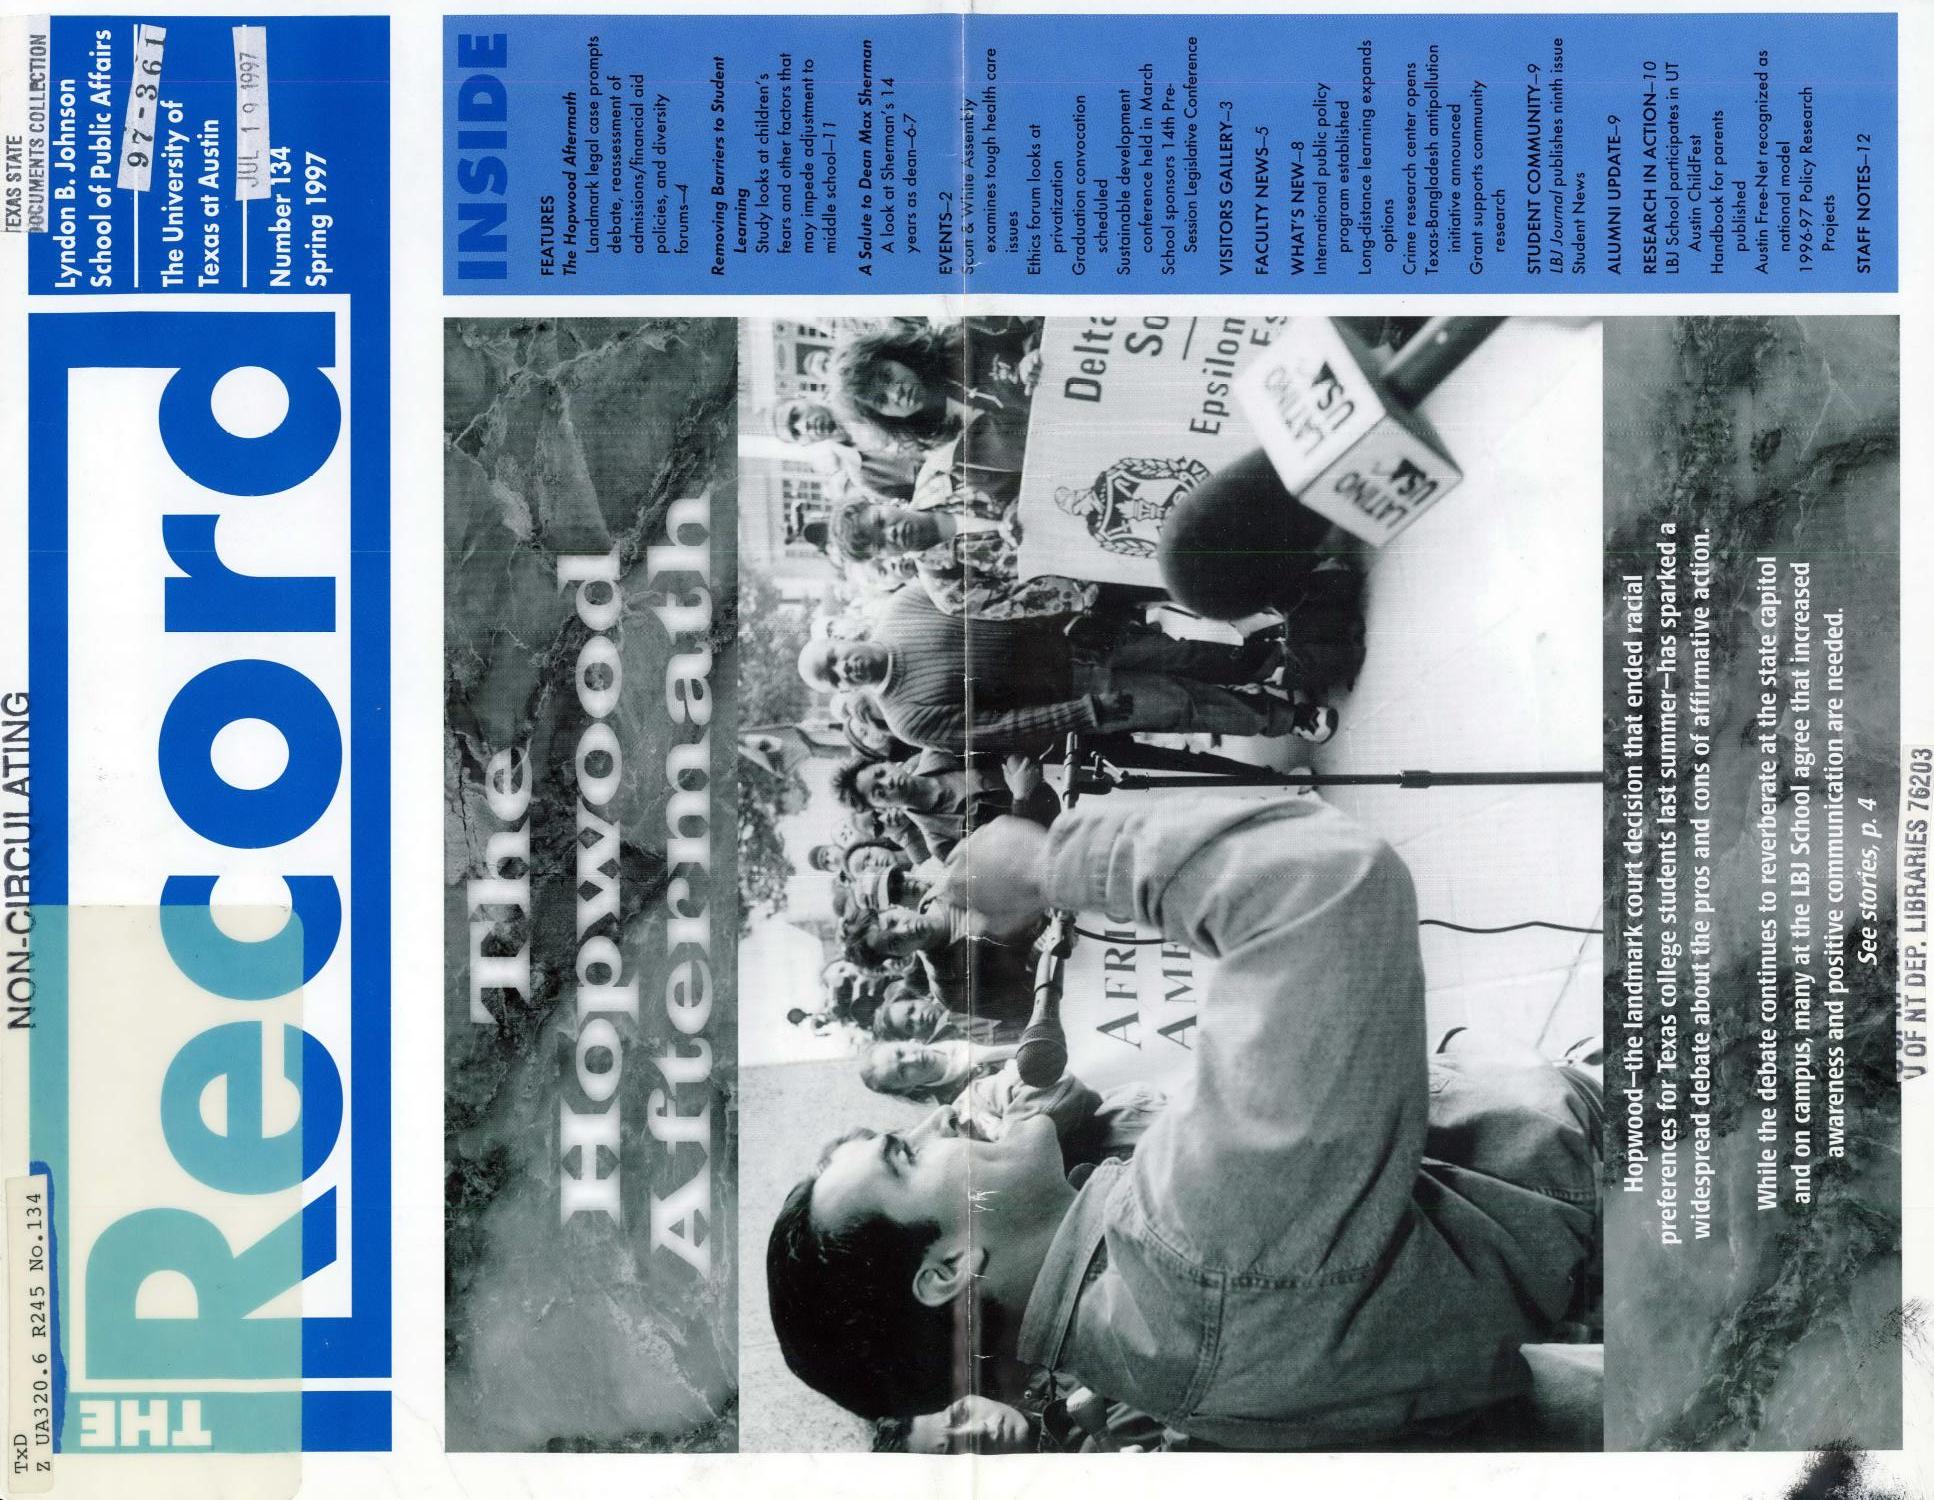 The Record, Number 134, Spring 1997
                                                
                                                    Front Cover
                                                